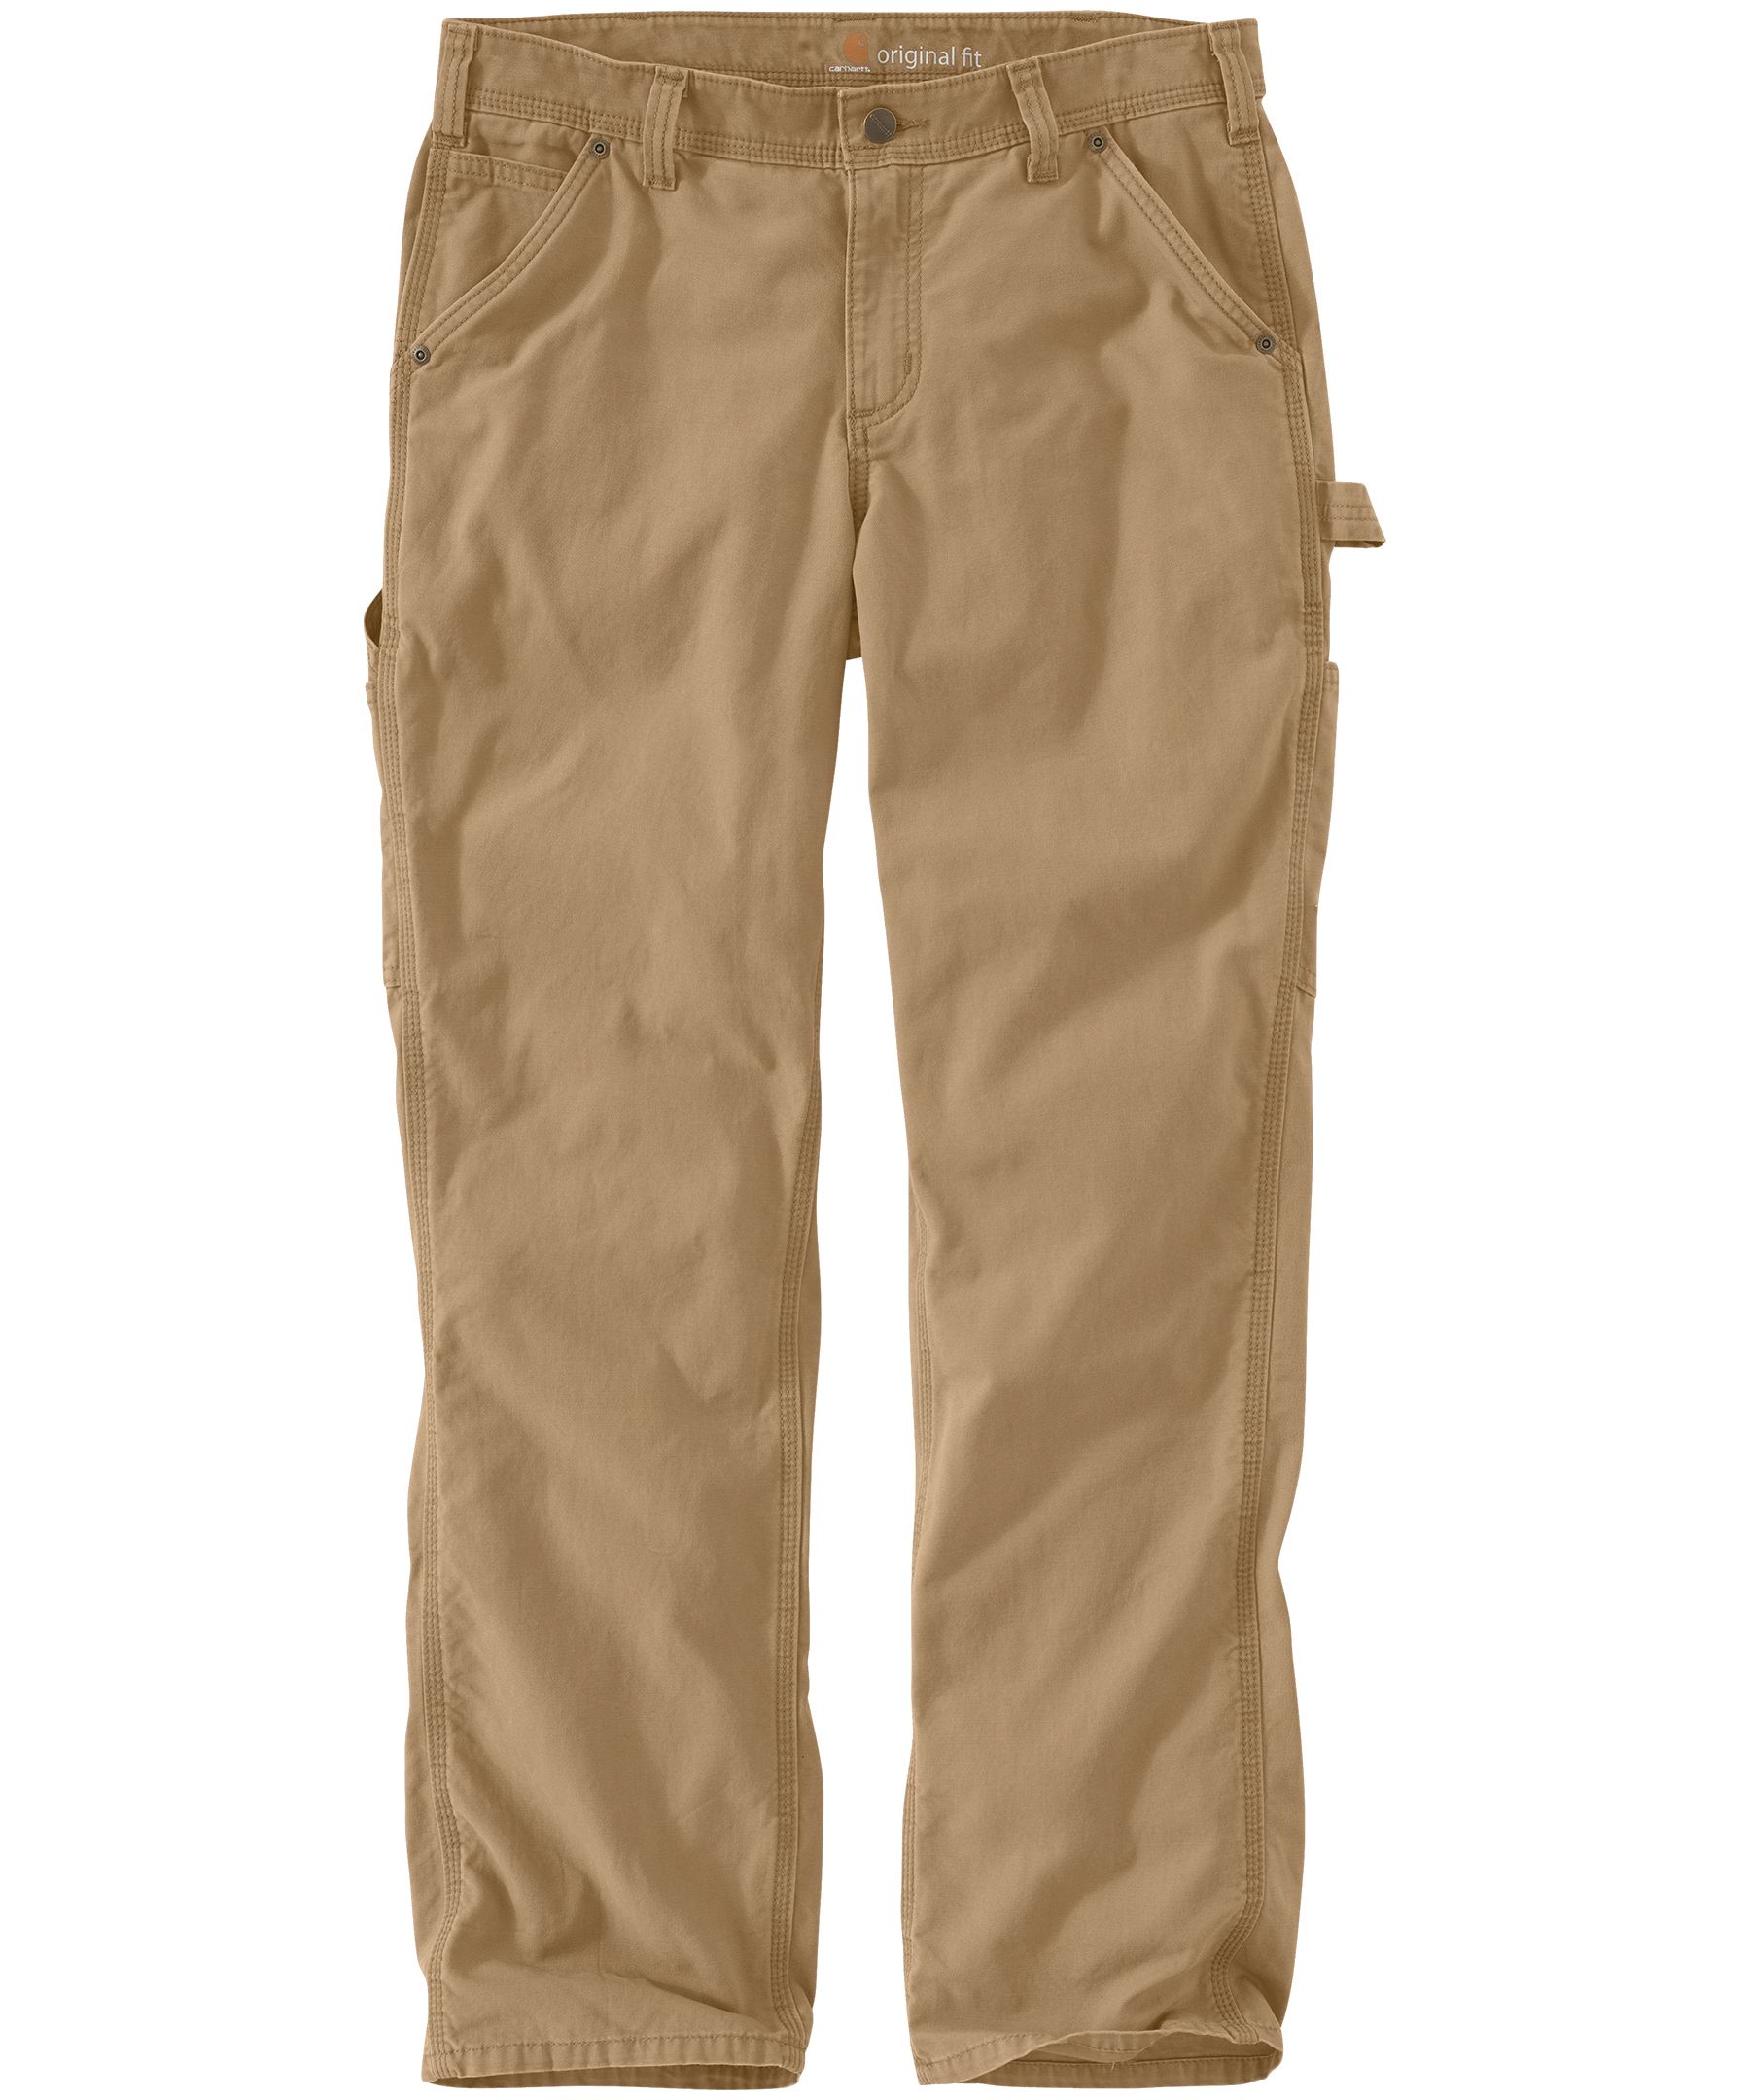 Carhartt Women's Stretch Fit Twill Double-Front Work Pants